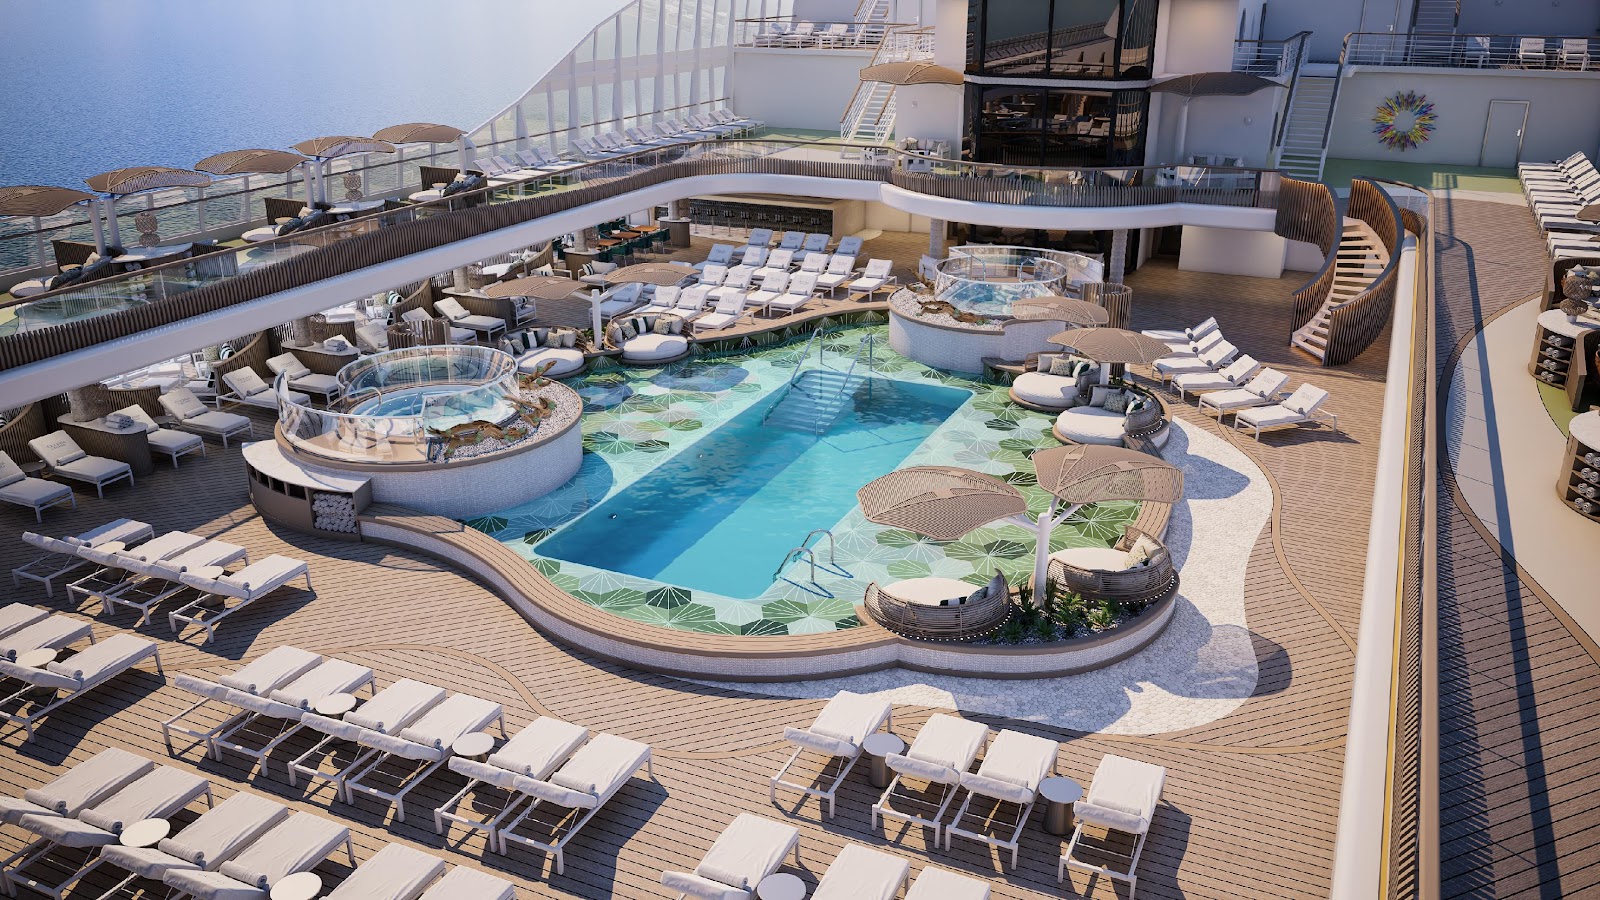 A pool on a cruise ship

Description automatically generated